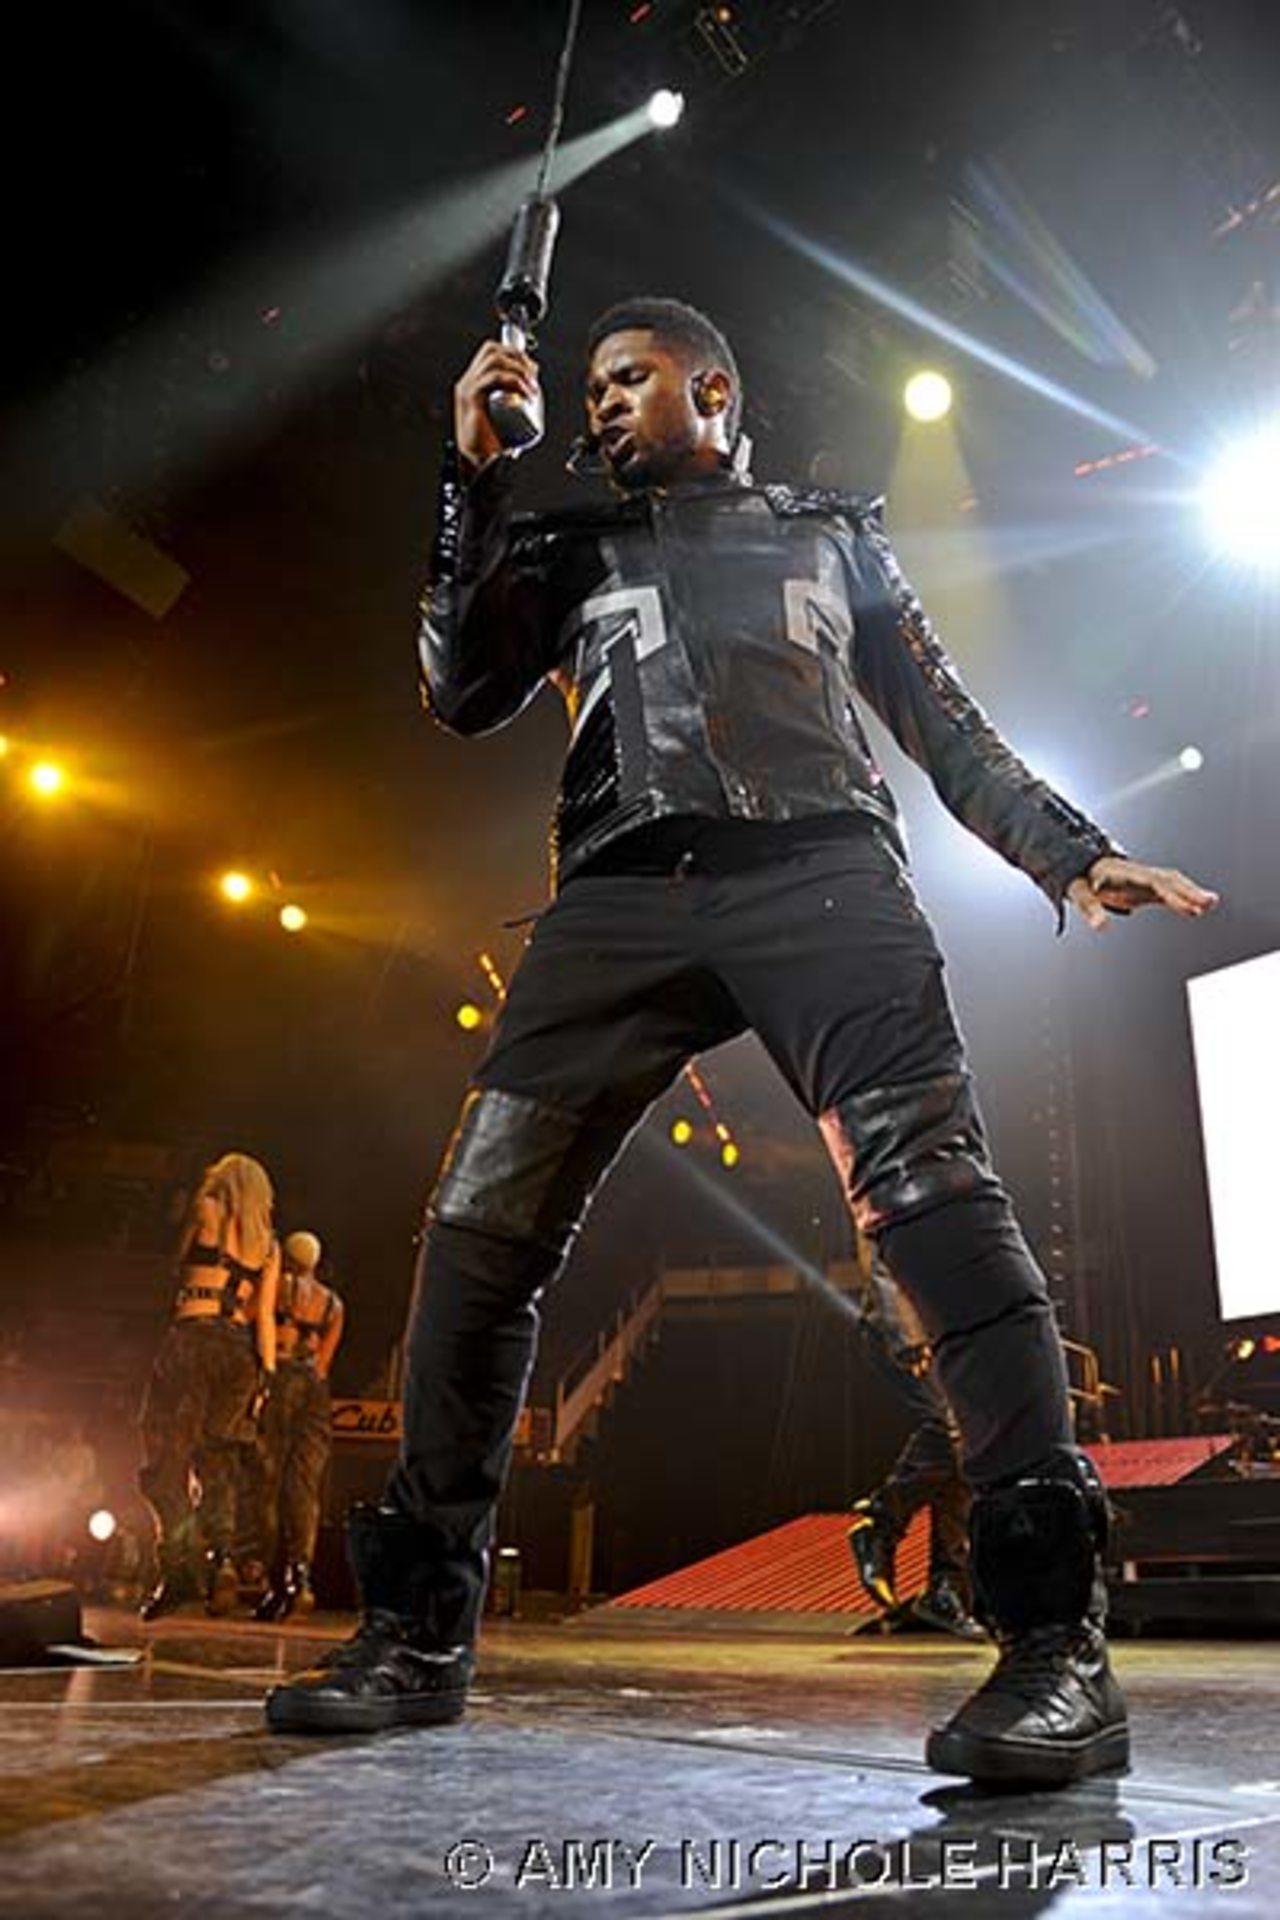 Usher in Cleveland on the "OMG Tour"